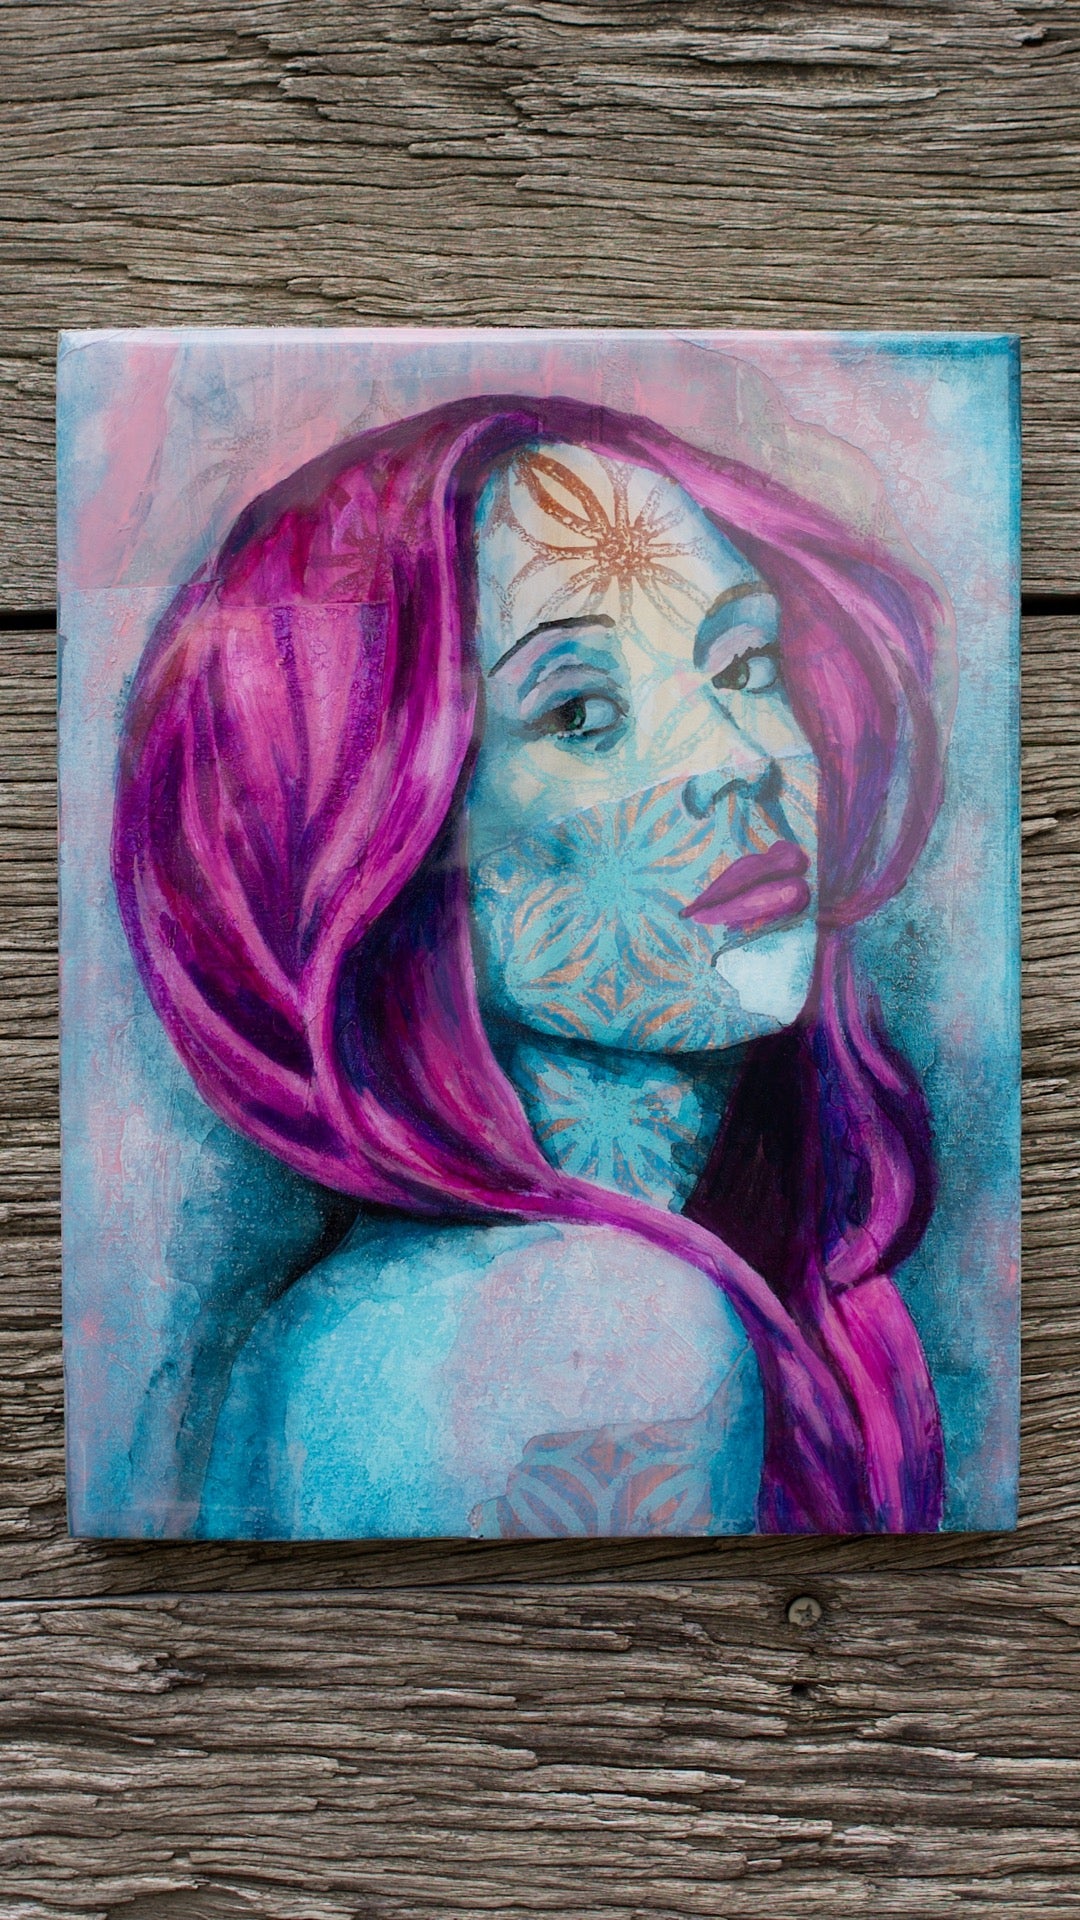 abstract art portait of a Woman on Panel art wall painting Blue, magenta, Purple 8" x 10" artists in melbourne